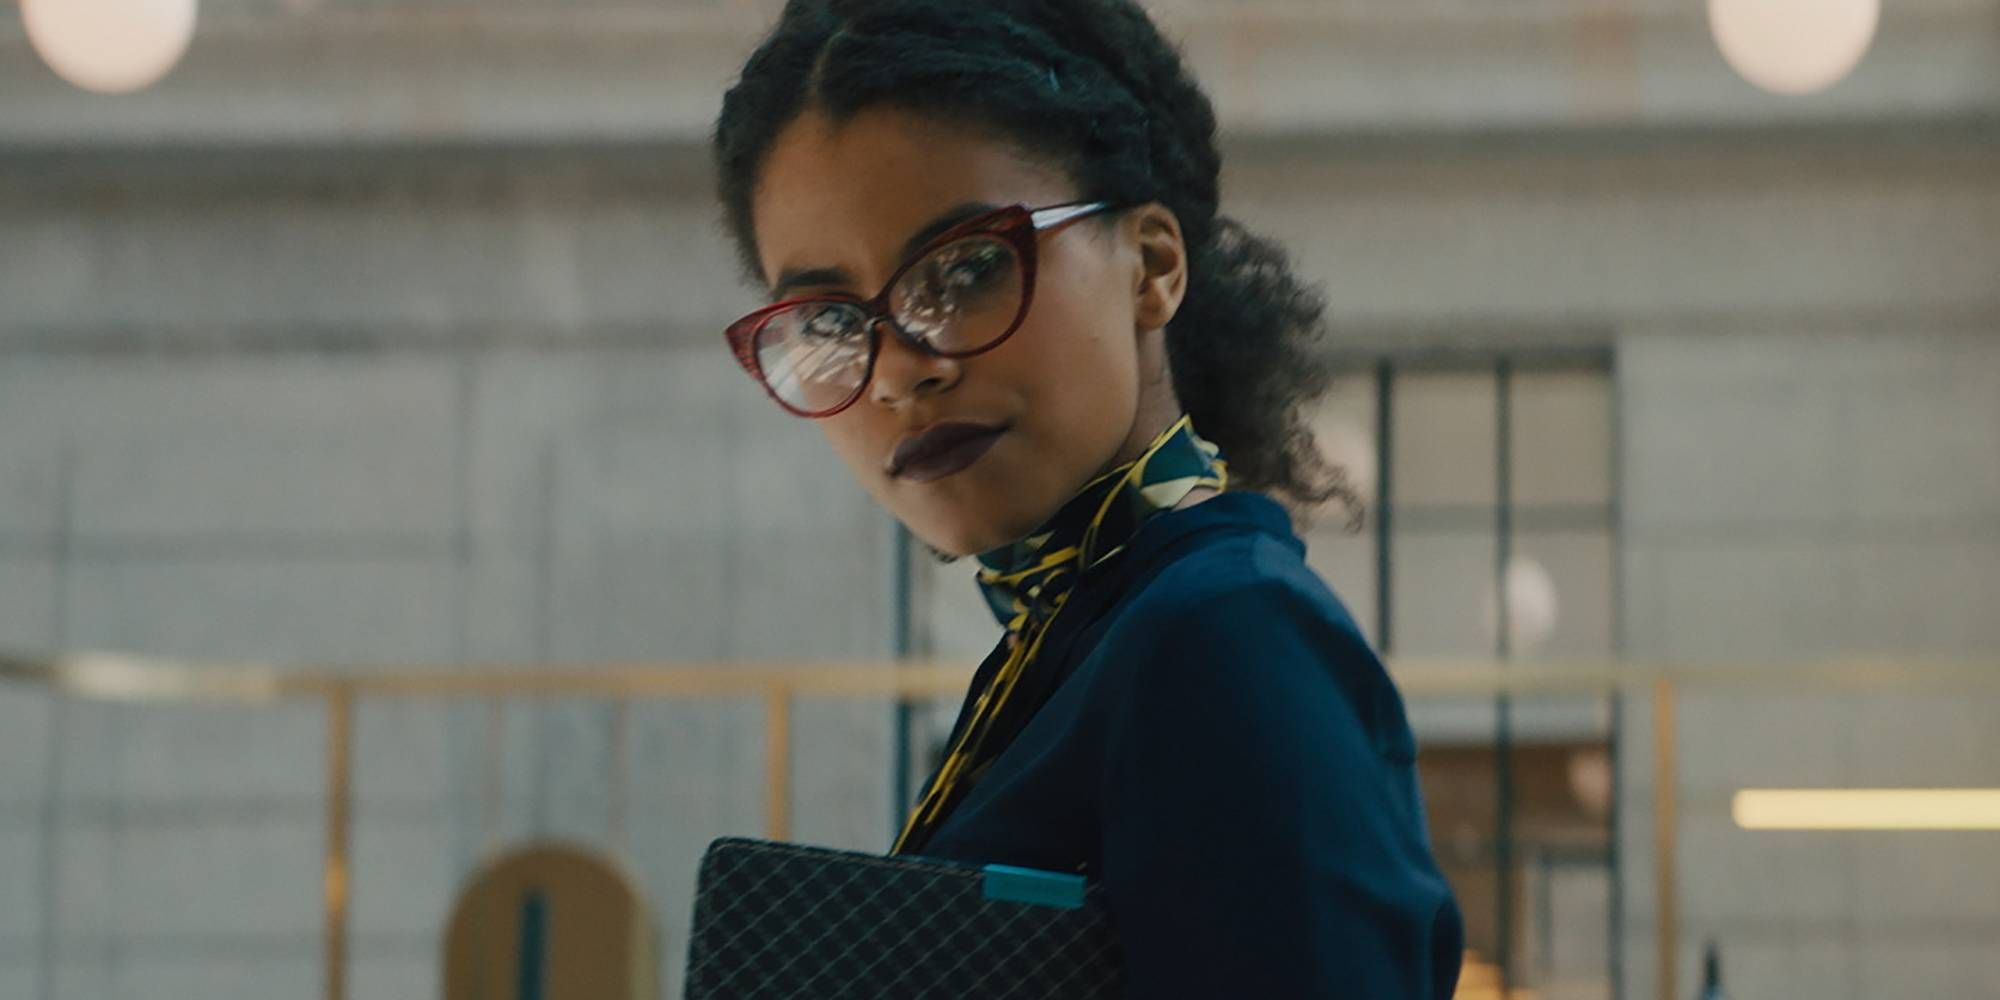 Zazie Beetz wearing red eyeglasses in Dead Pigs and looking at someone off-camera.